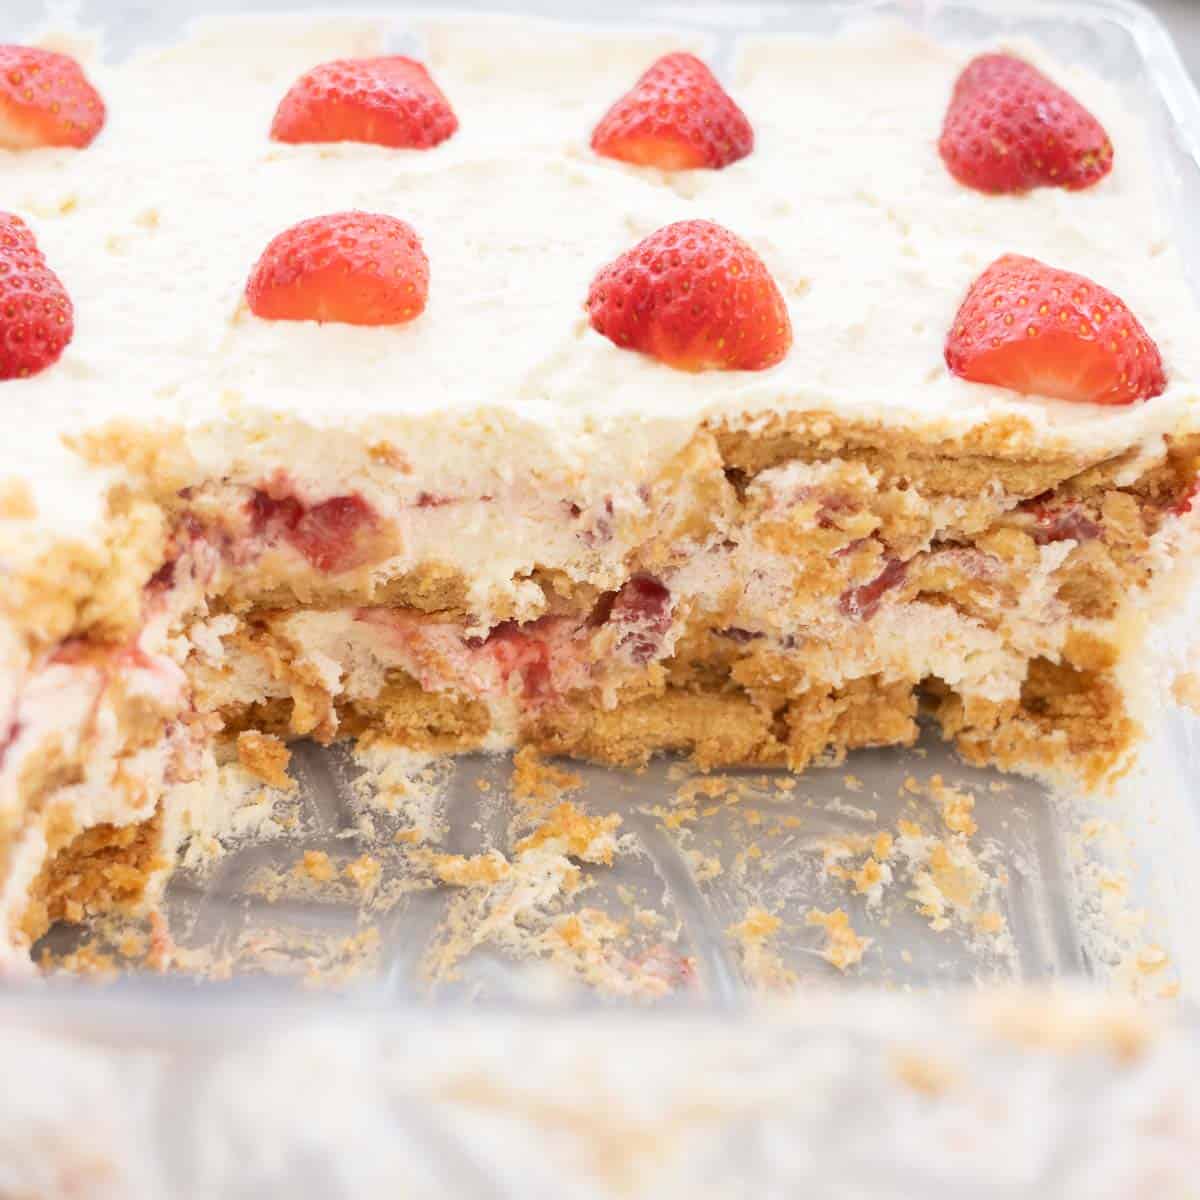 Looking into a container of a strawberry shortcake, some pieces removed so you can see the layers of biscuit, fruit and cream. 